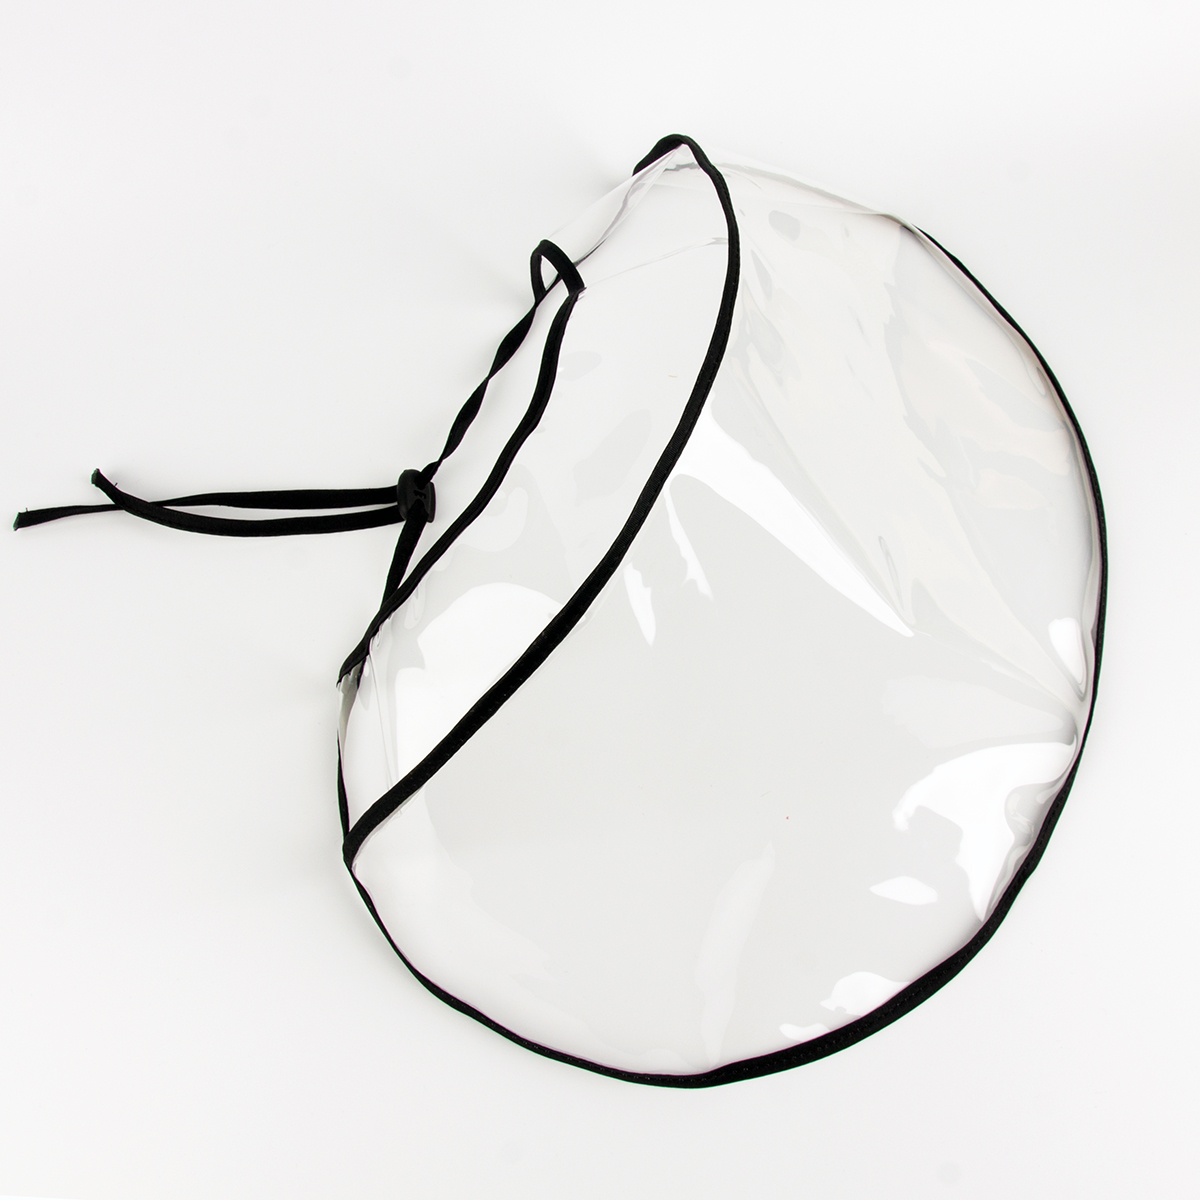 PVC-Transparent-Breathable-Splash-proof-Dustproof-Full-Face-Mask-Disassembleable-For-All-Hats-Fishma-1660688-9